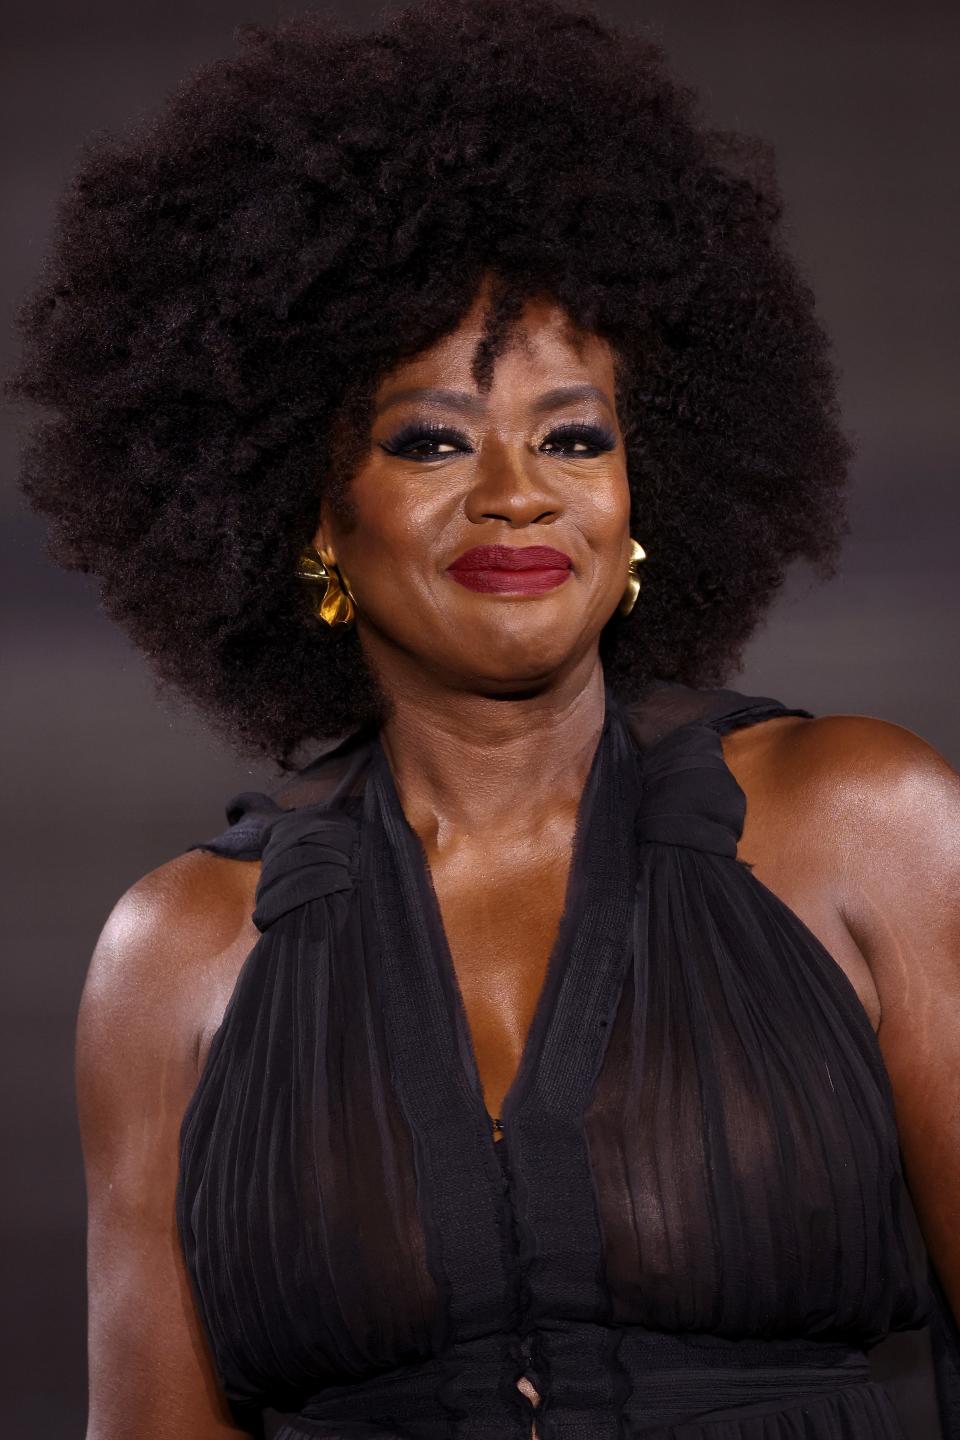 Viola with voluminous afro hair and a black sleeveless dress smiles